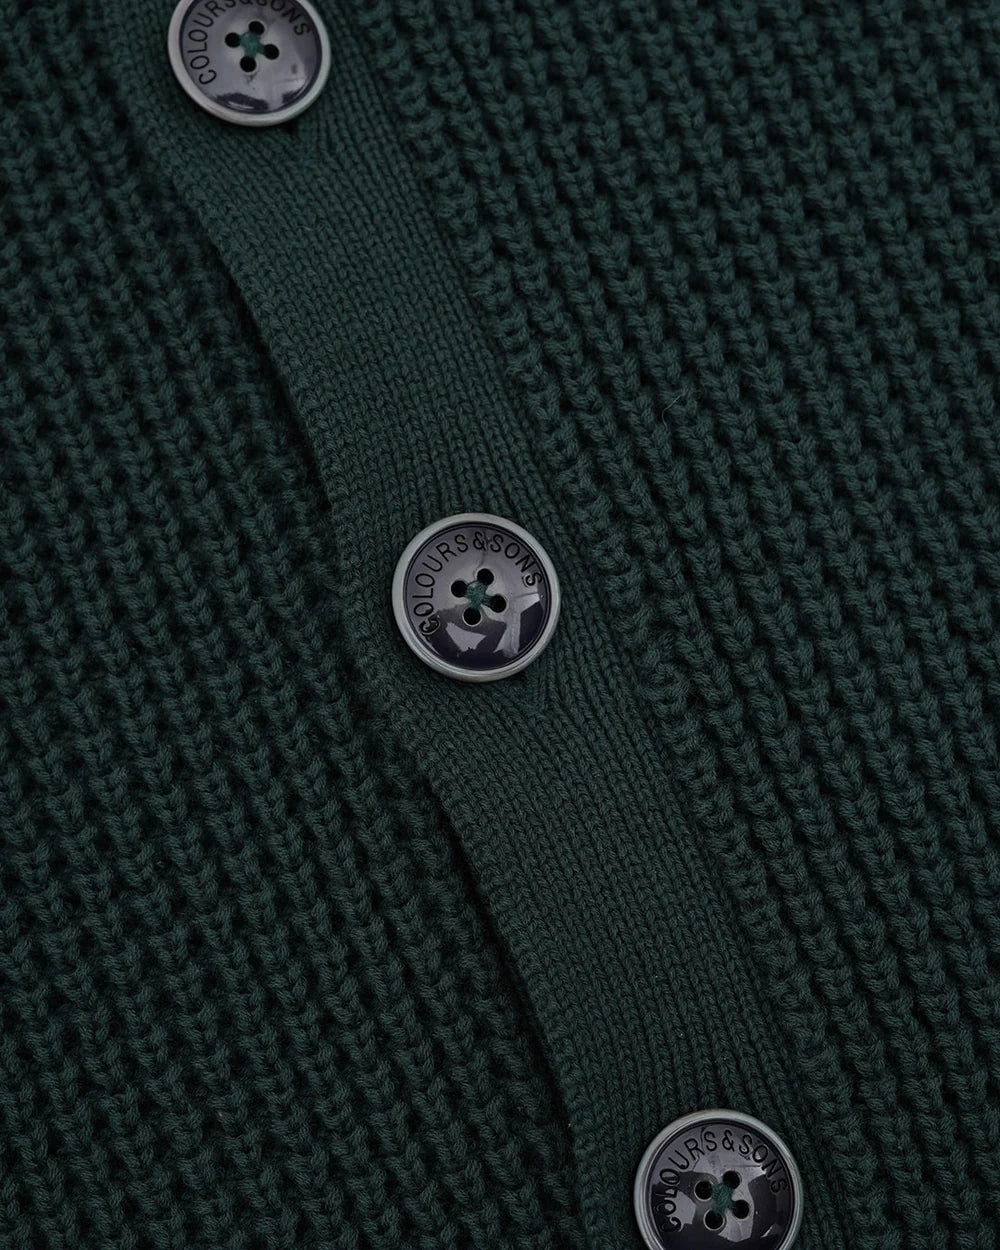 Colours & Sons Cardigan Green